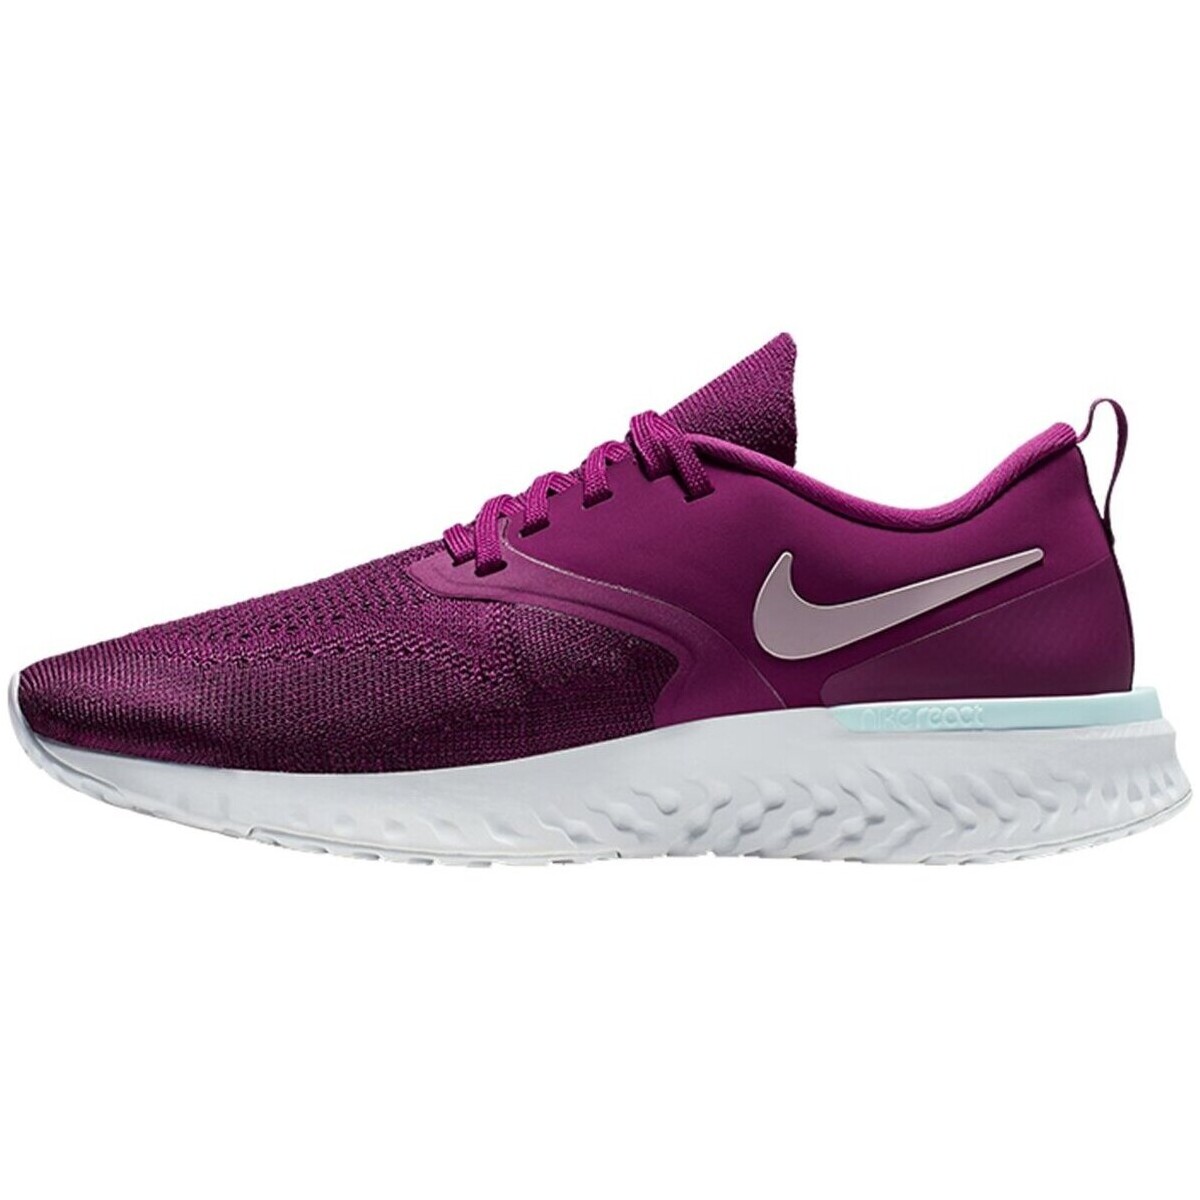 Chaussures Femme Nike Em Xdr Ch Pack  Autres